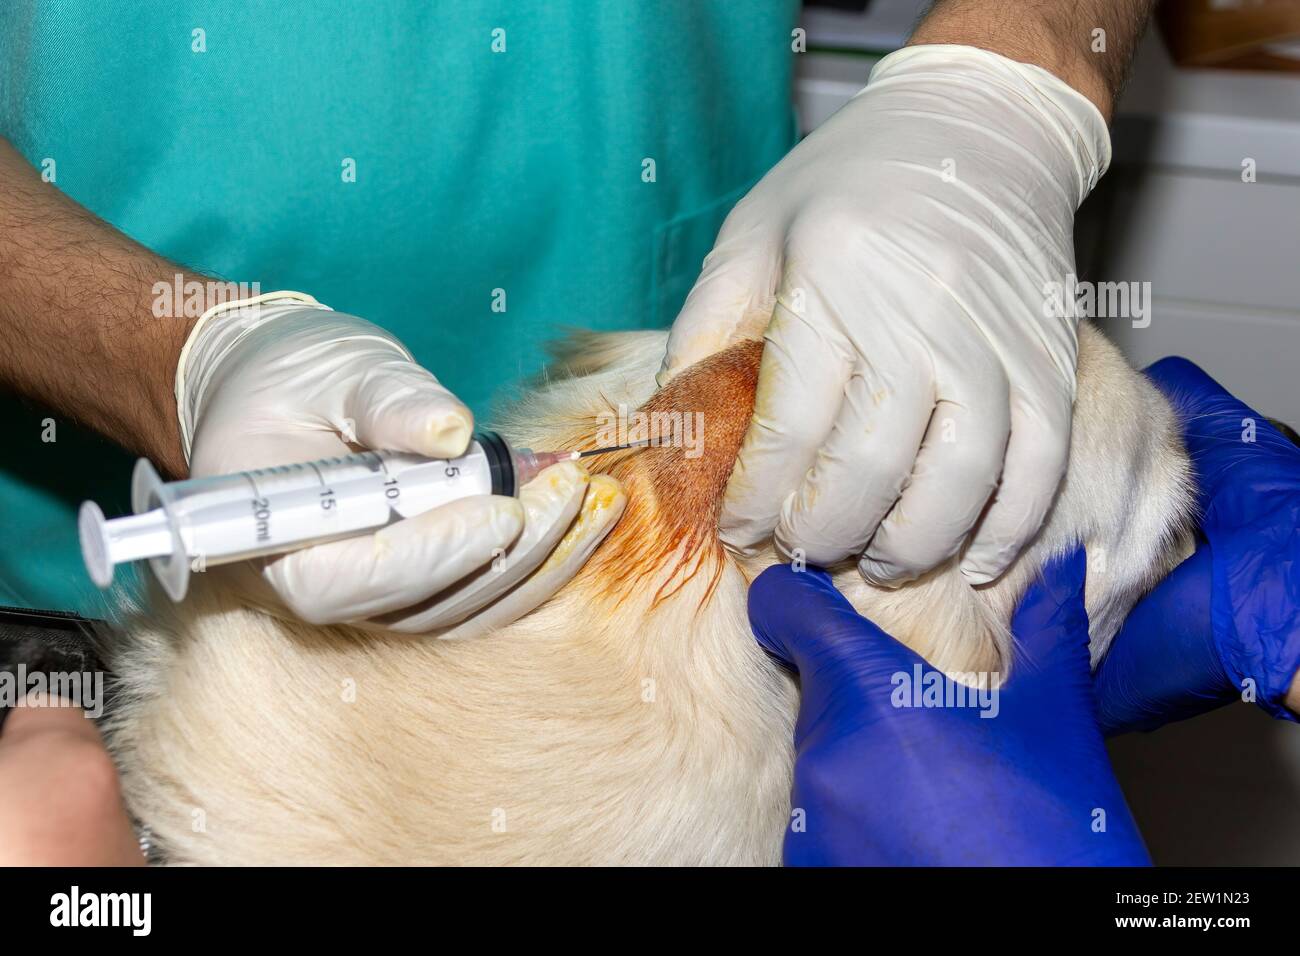 A Skilled Veterinarian drains an abcess on the head of a Golden Retriever dog Stock Photo